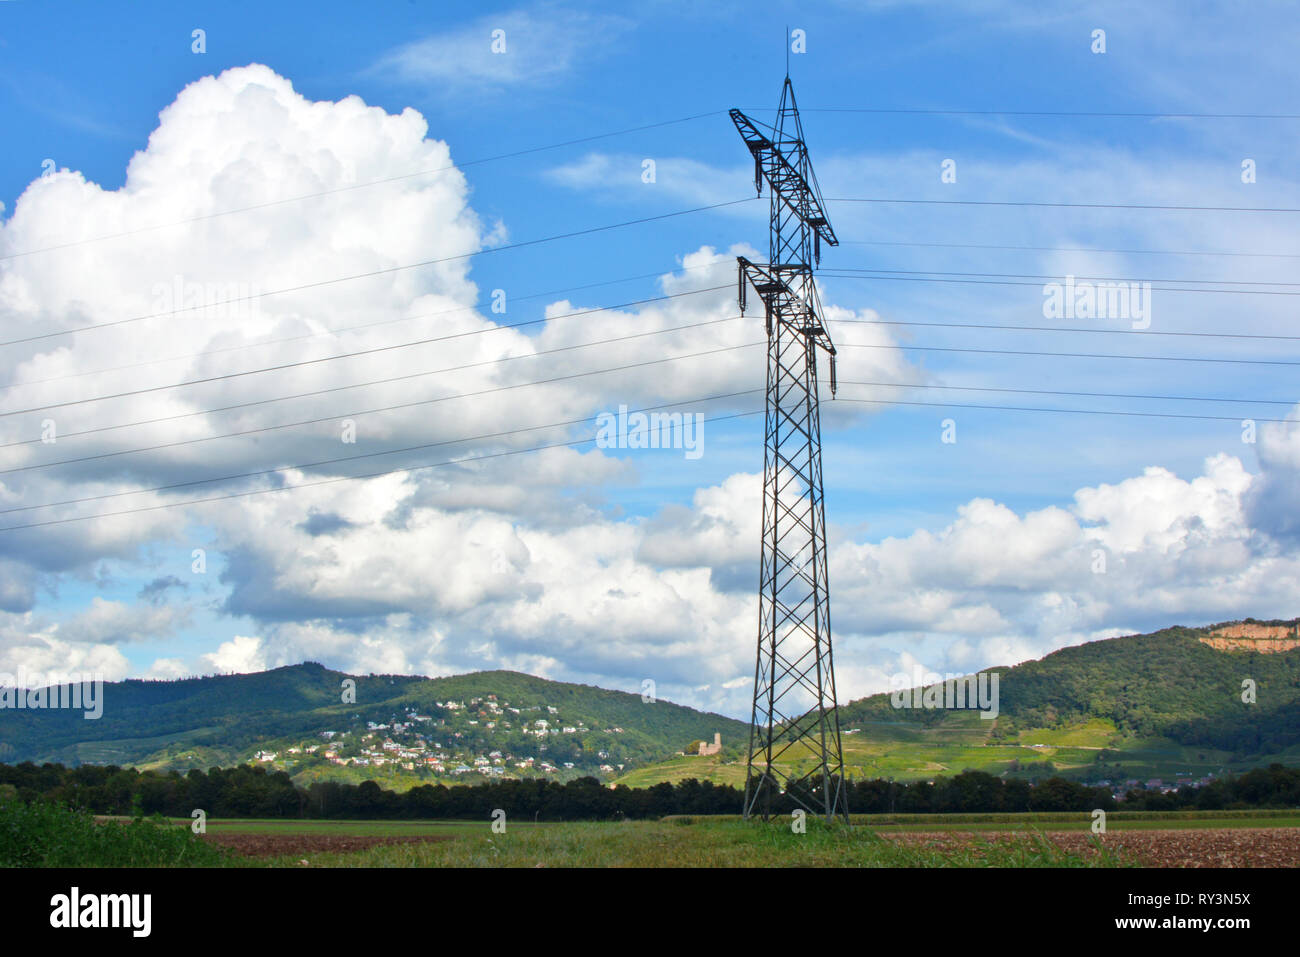 Transmission Tower in front of mountain range and blue sky with clouds Stock Photo